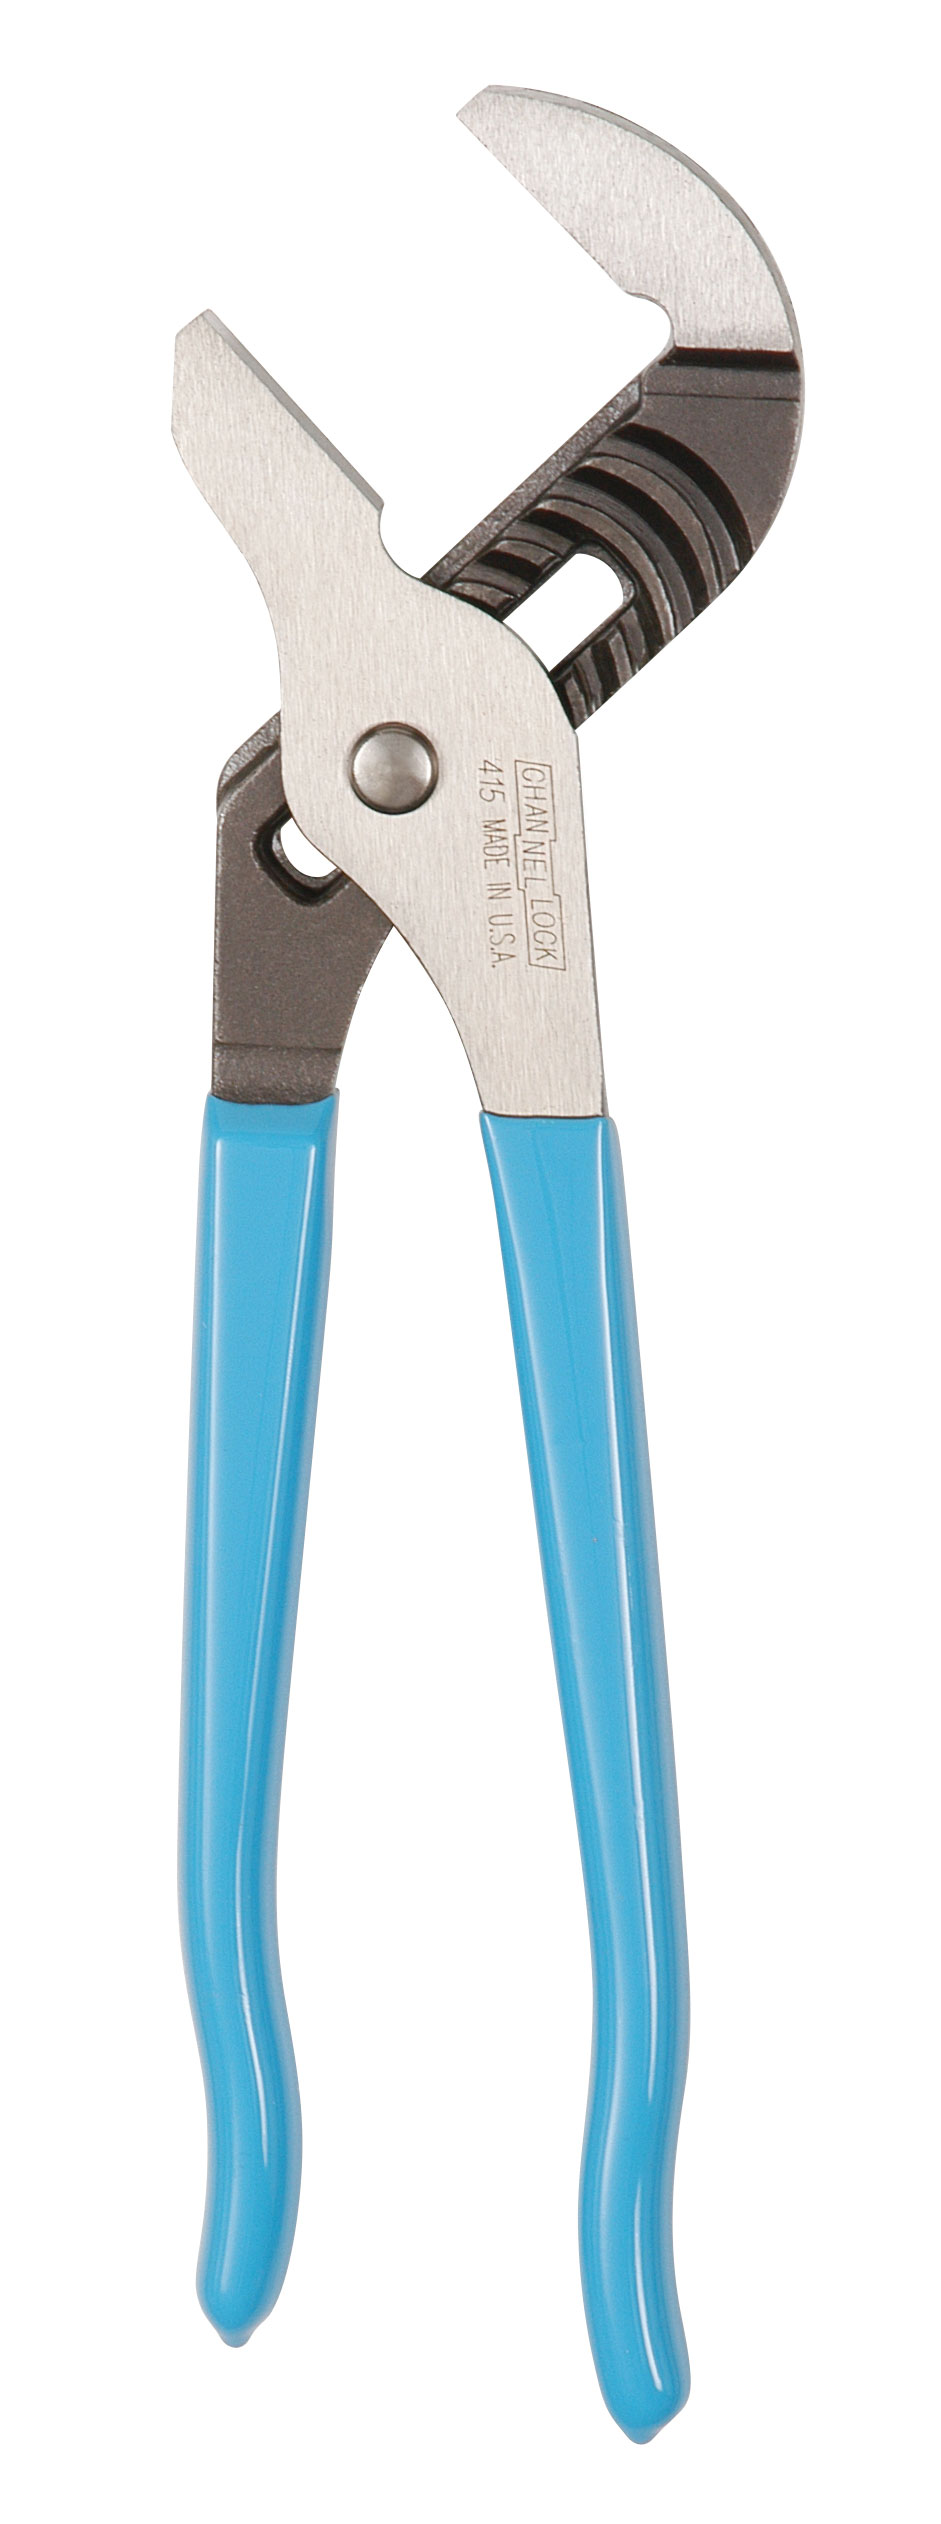 Channellock 415 Smooth Jaw Tongue and Groove Pliers